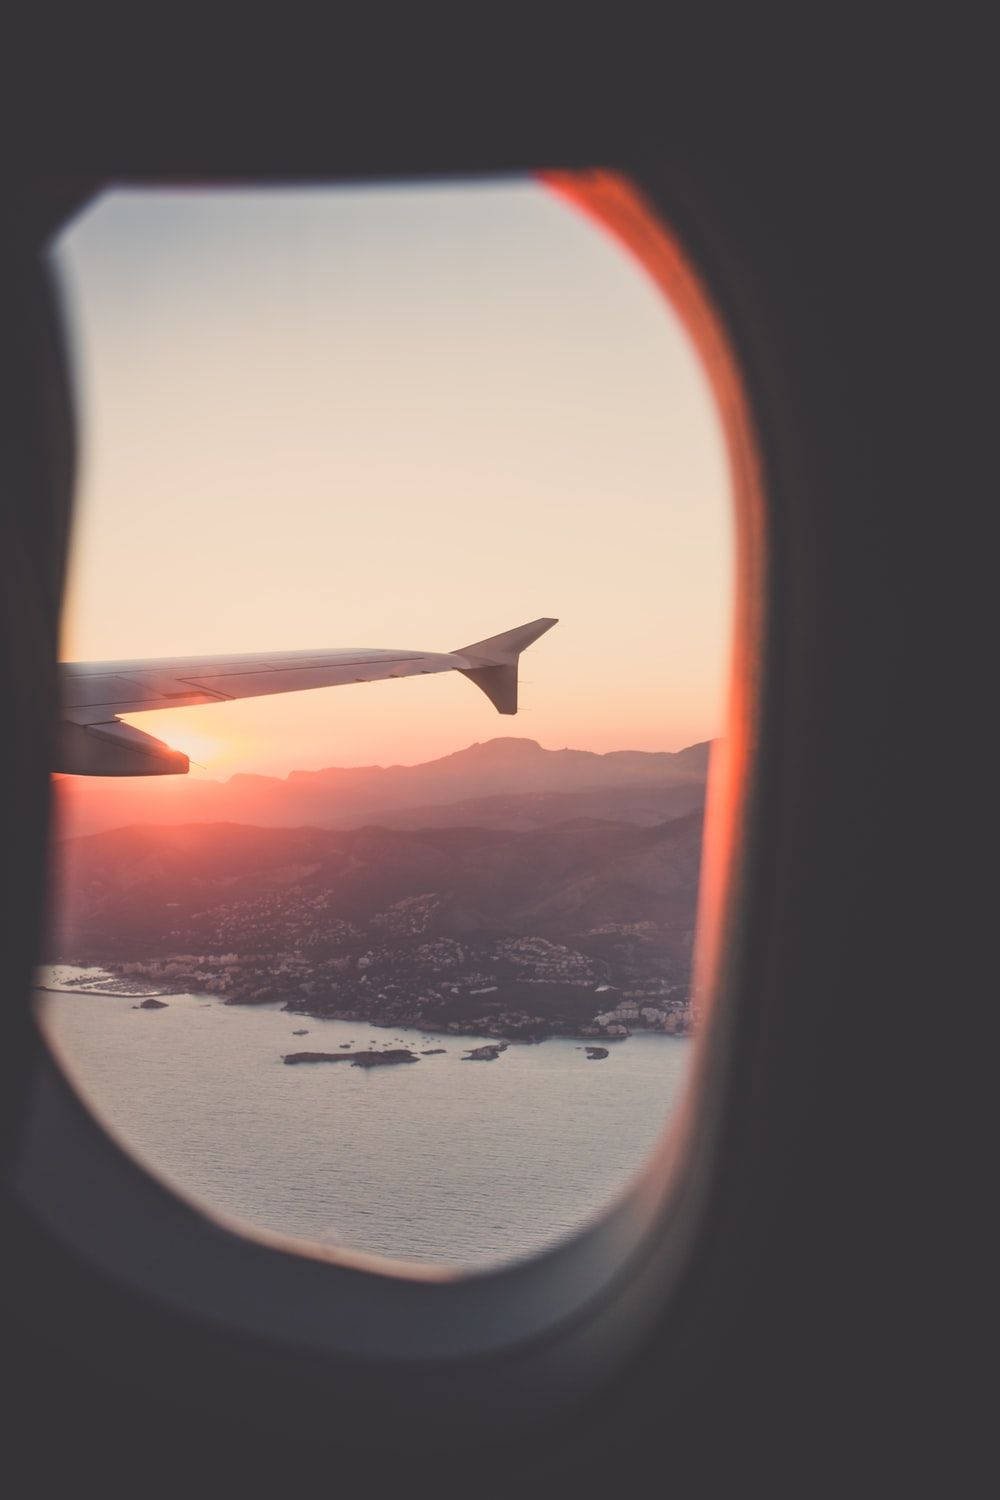 Download Airplane Window Aesthetic Sunset Wallpaper